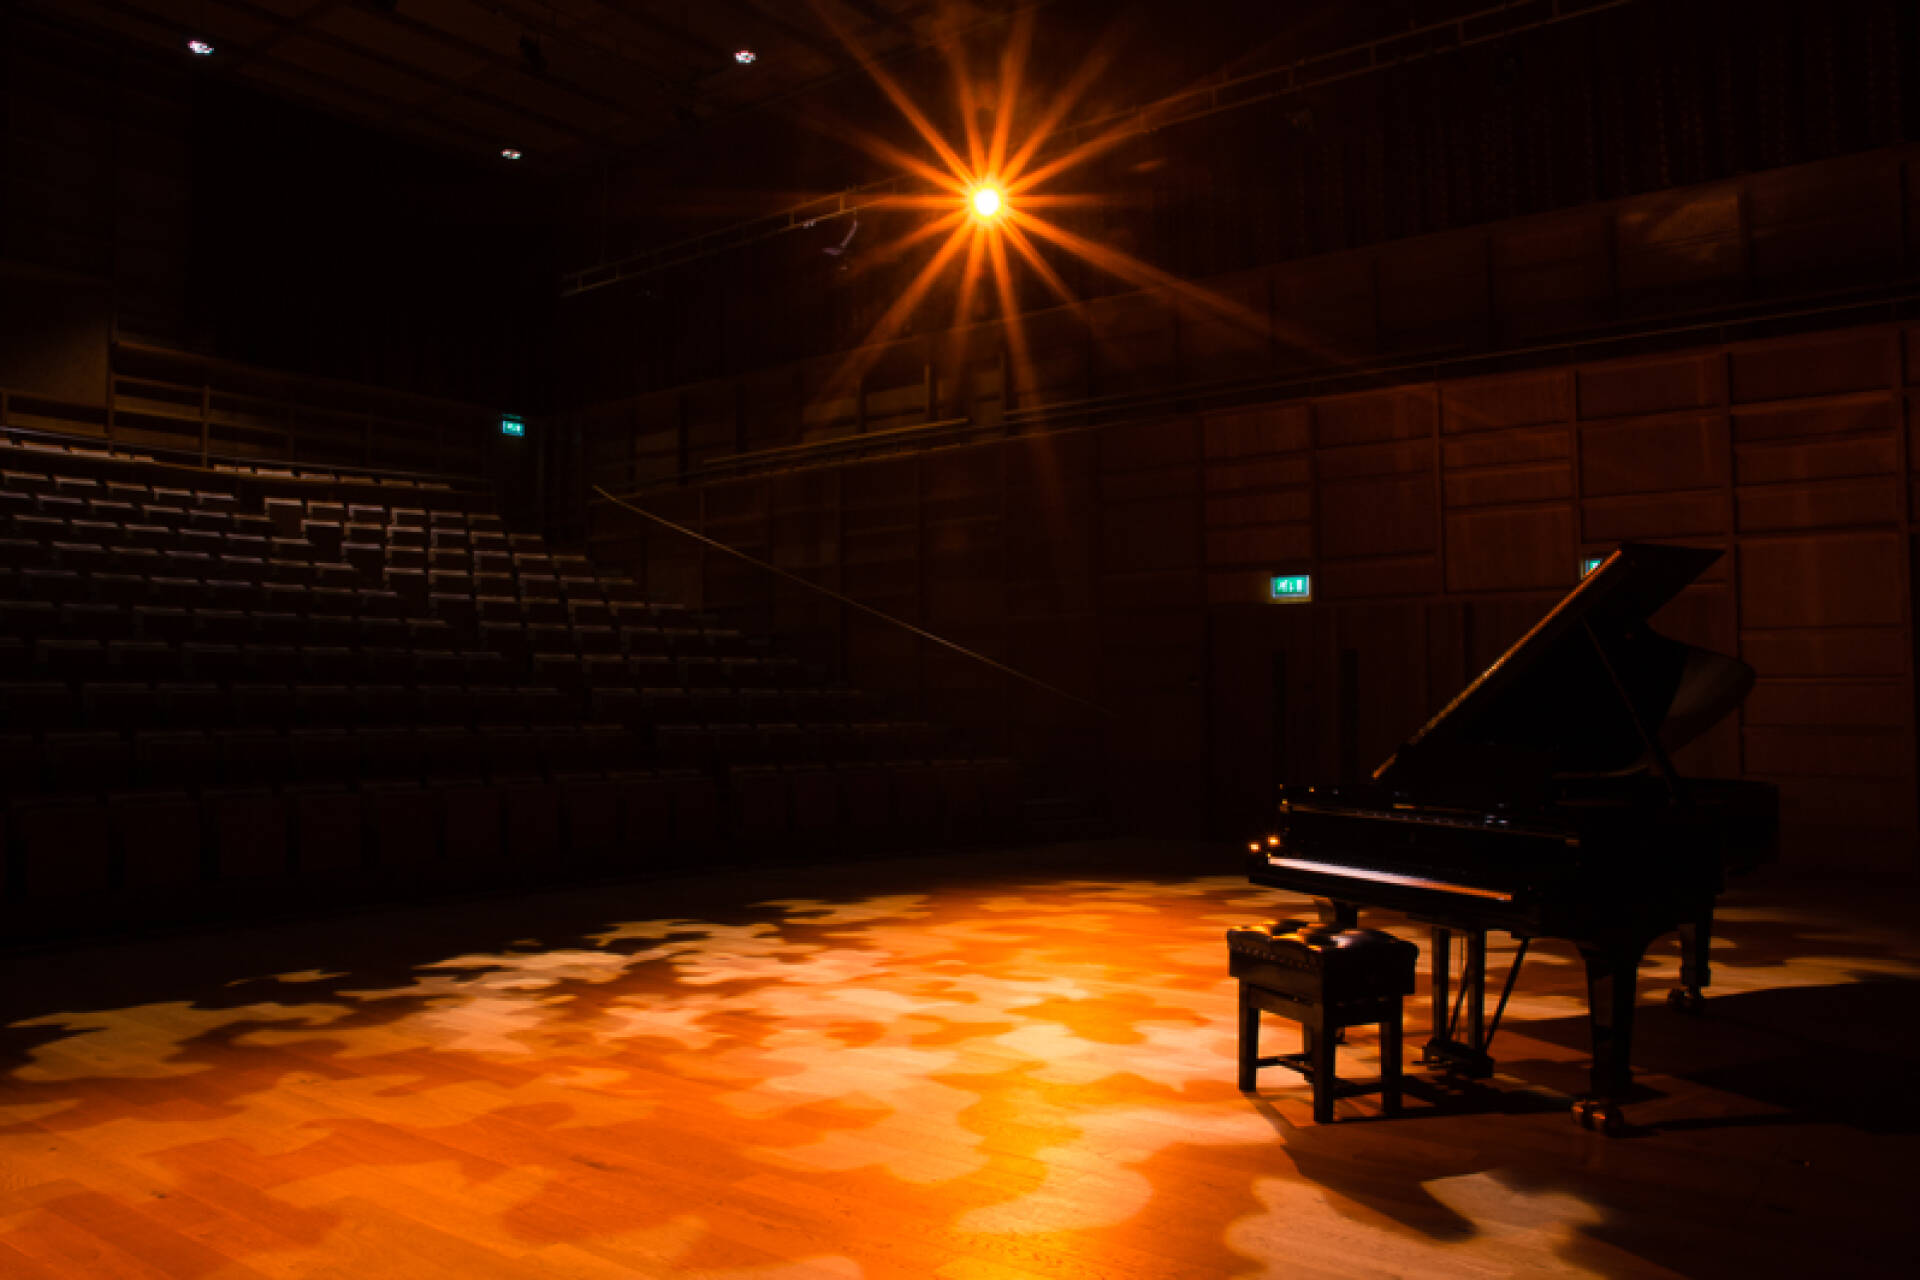 A spotlight casts decorative shadows on the floor of the darkened concert-hall